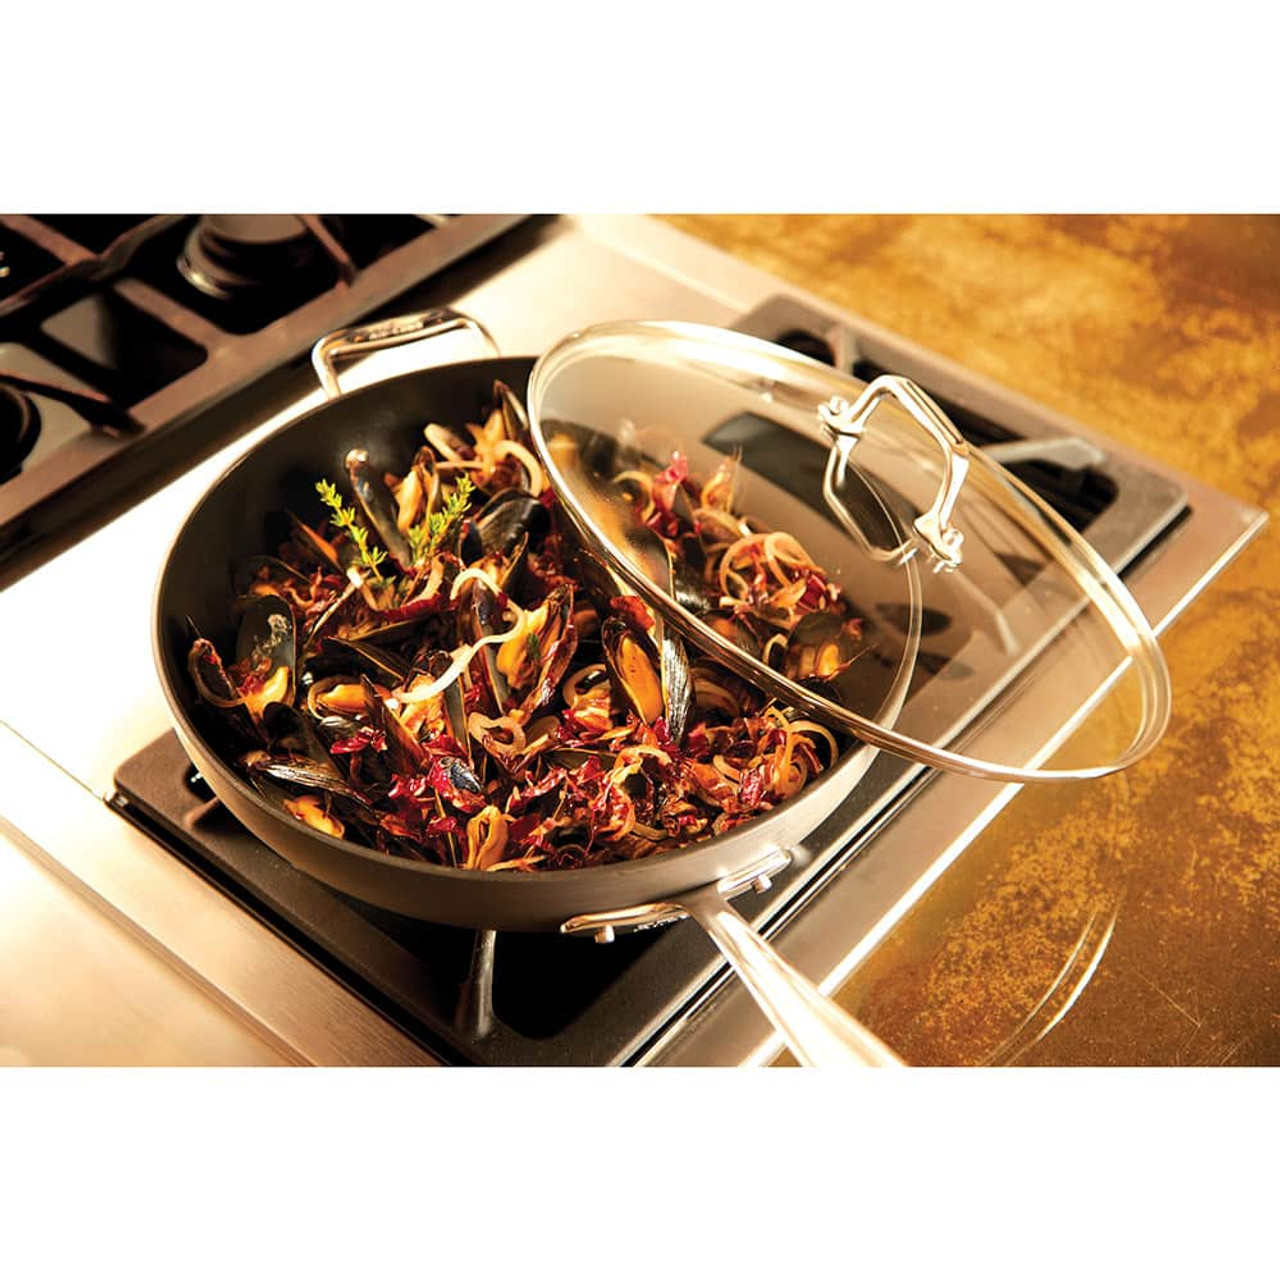 https://cdn11.bigcommerce.com/s-hccytny0od/images/stencil/1280x1280/products/520/8388/all-clad-ha1-8-10-inch-fry-pan-set-3__04714.1580247074.jpg?c=2?imbypass=on